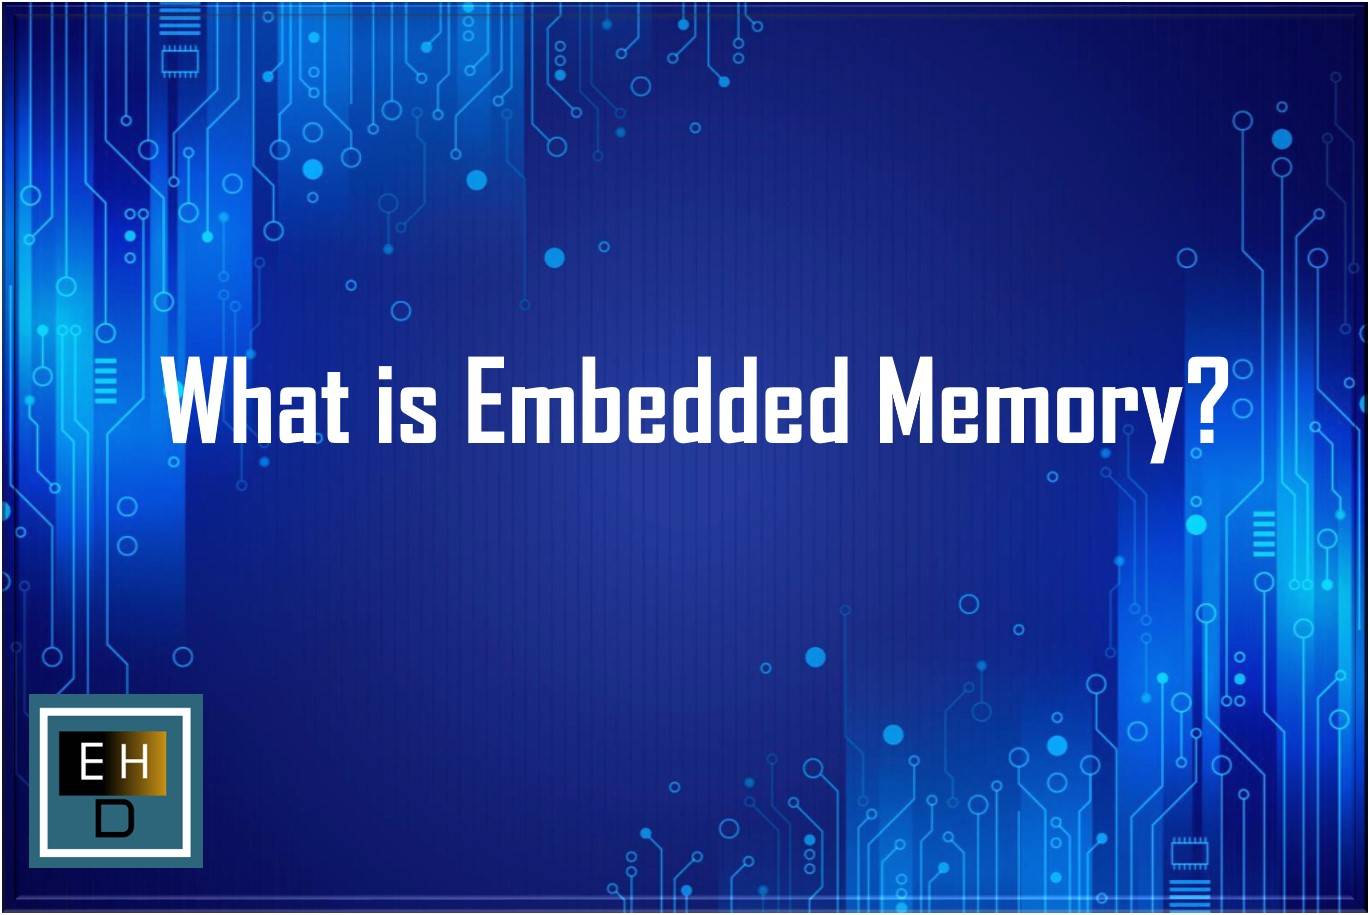 What is Embedded Memory?